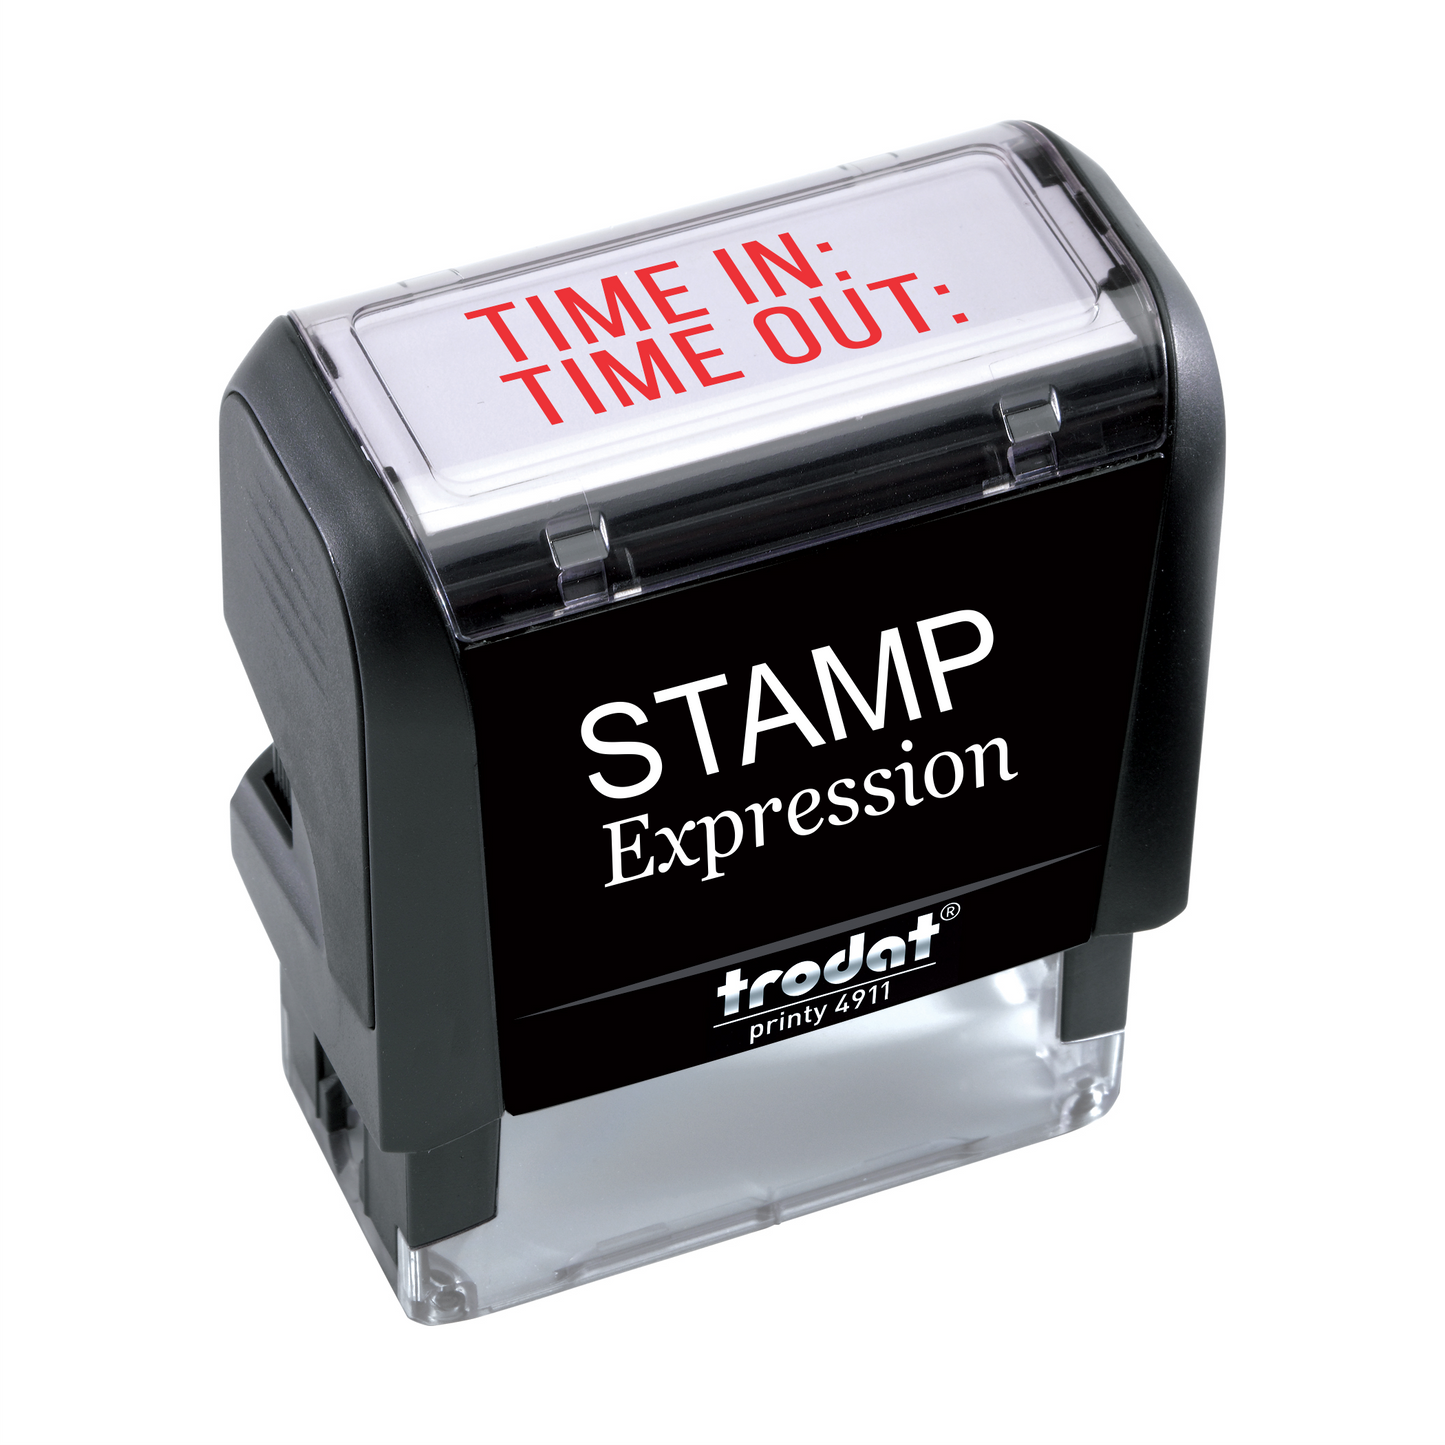 TIME in TIME Out Office Self Inking Rubber Stamp (SH-5785)